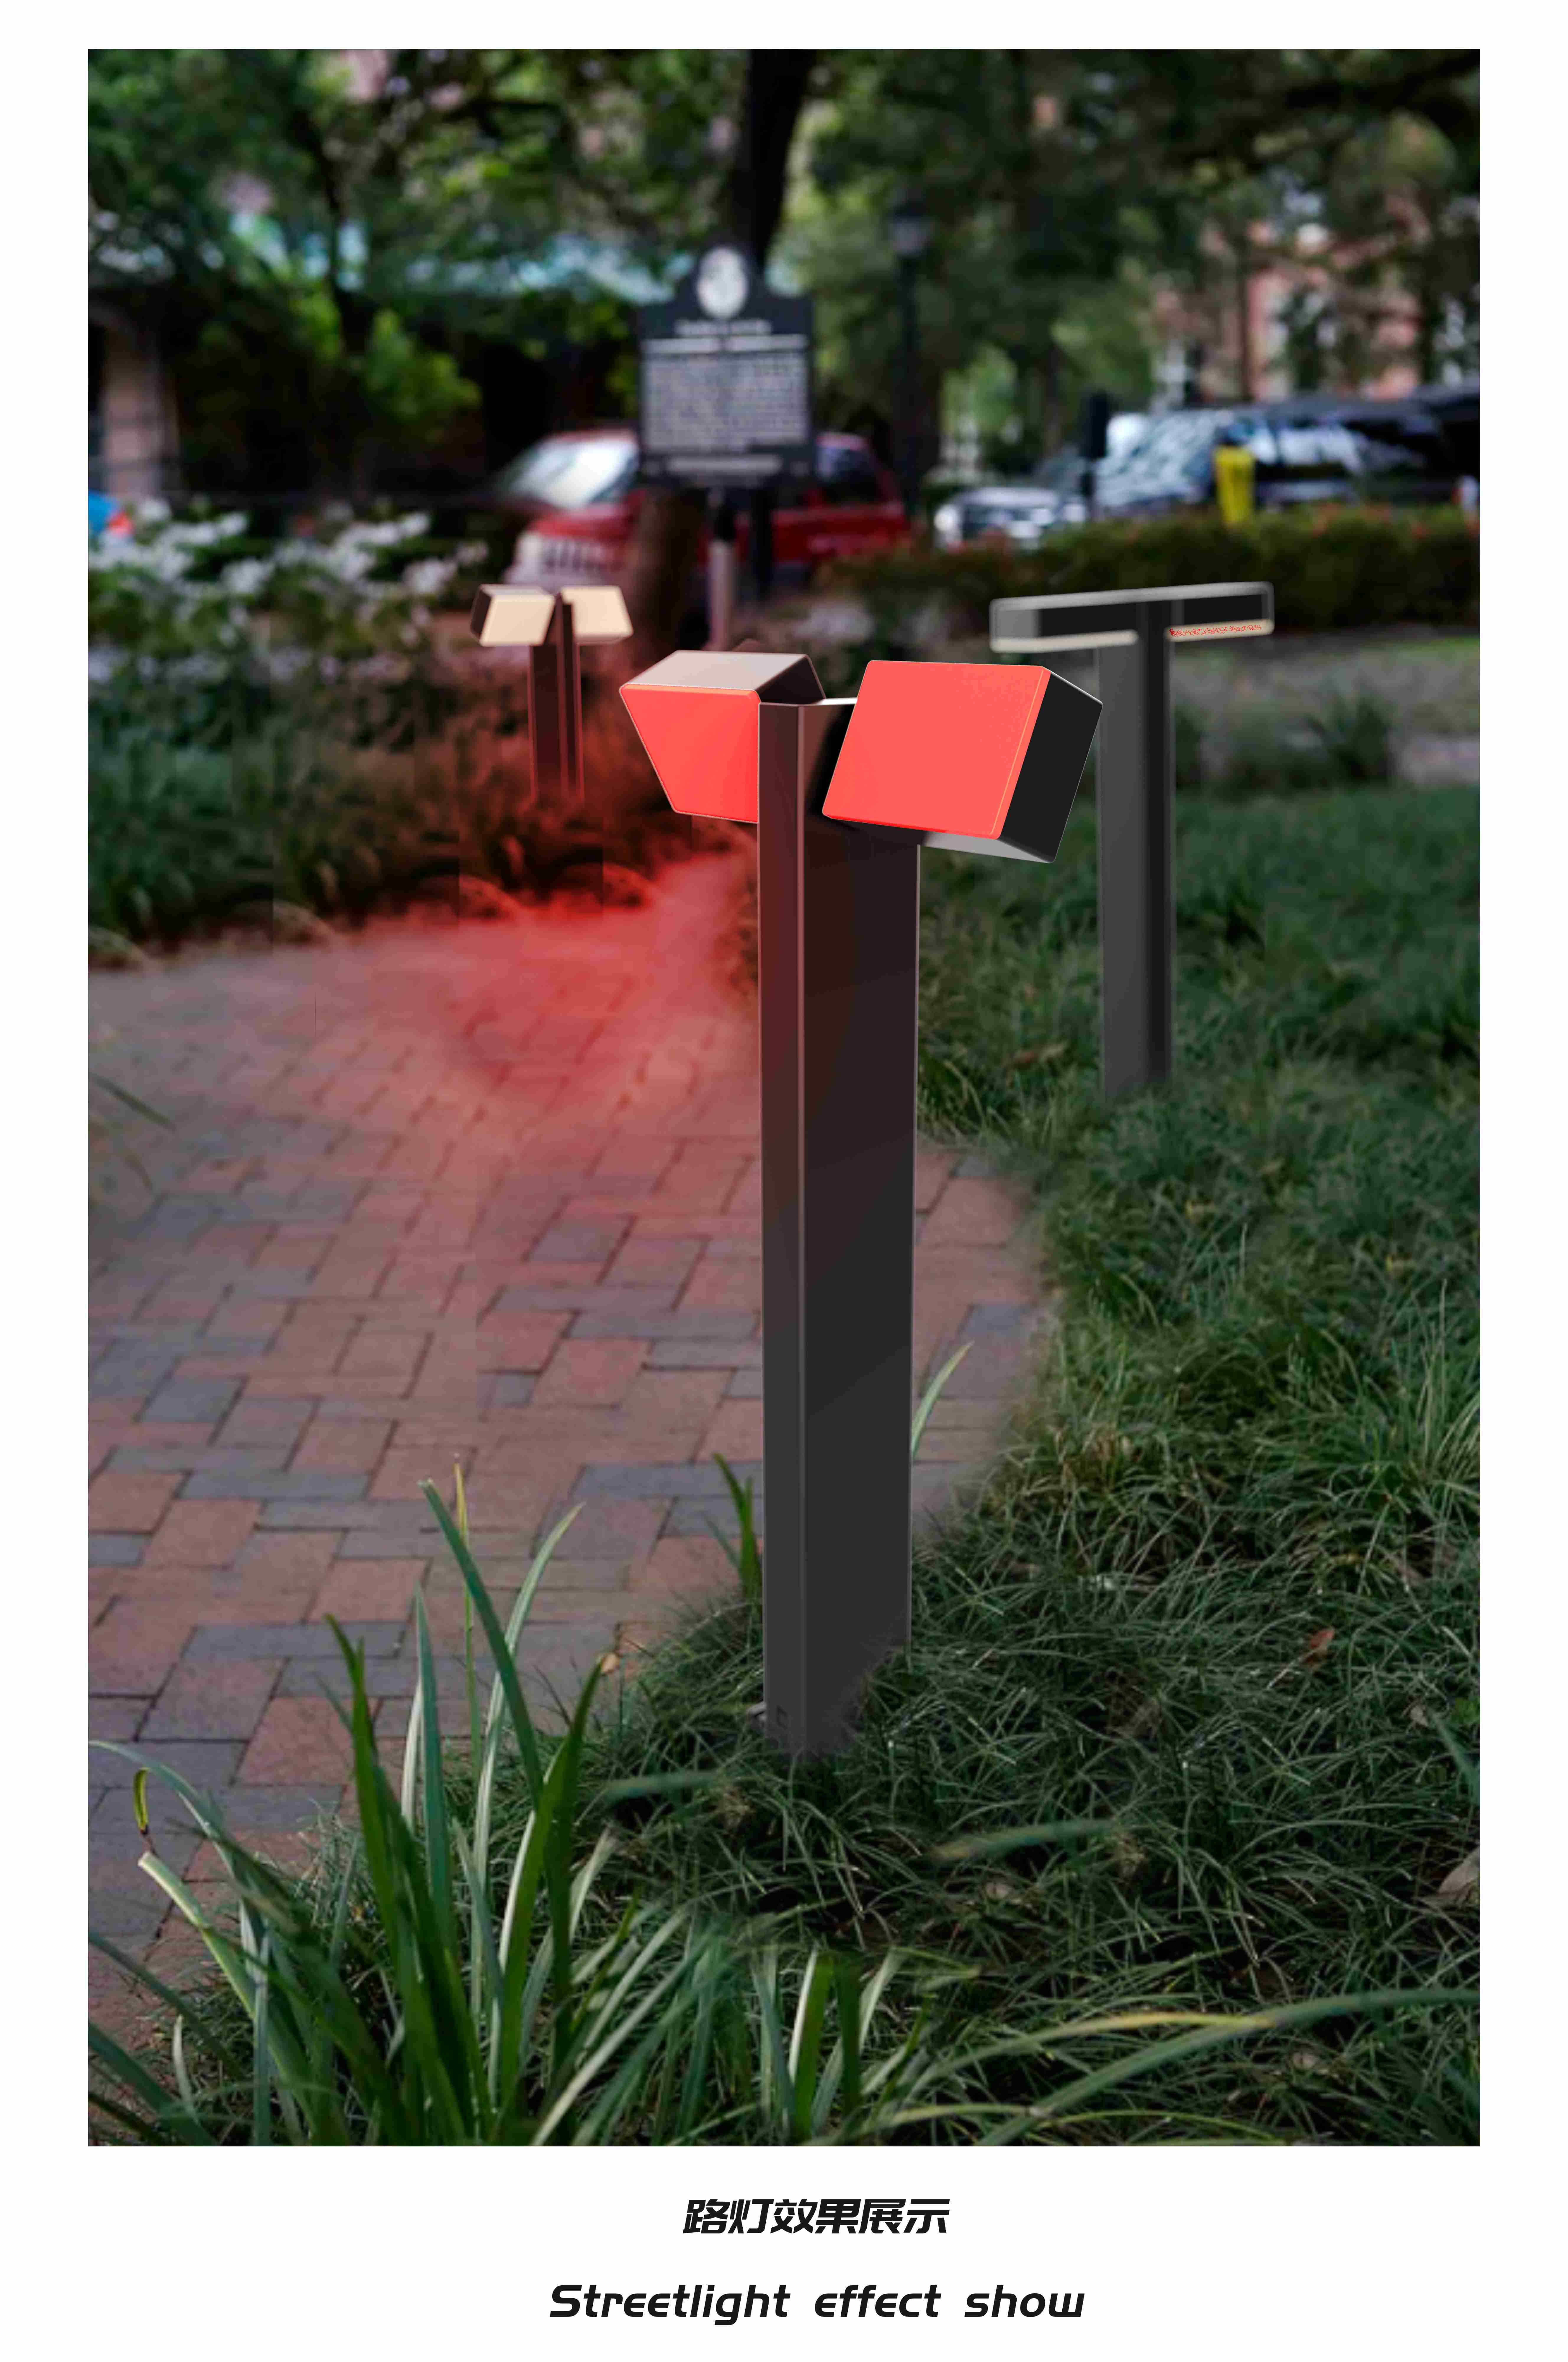 Colored courtyard square lamp